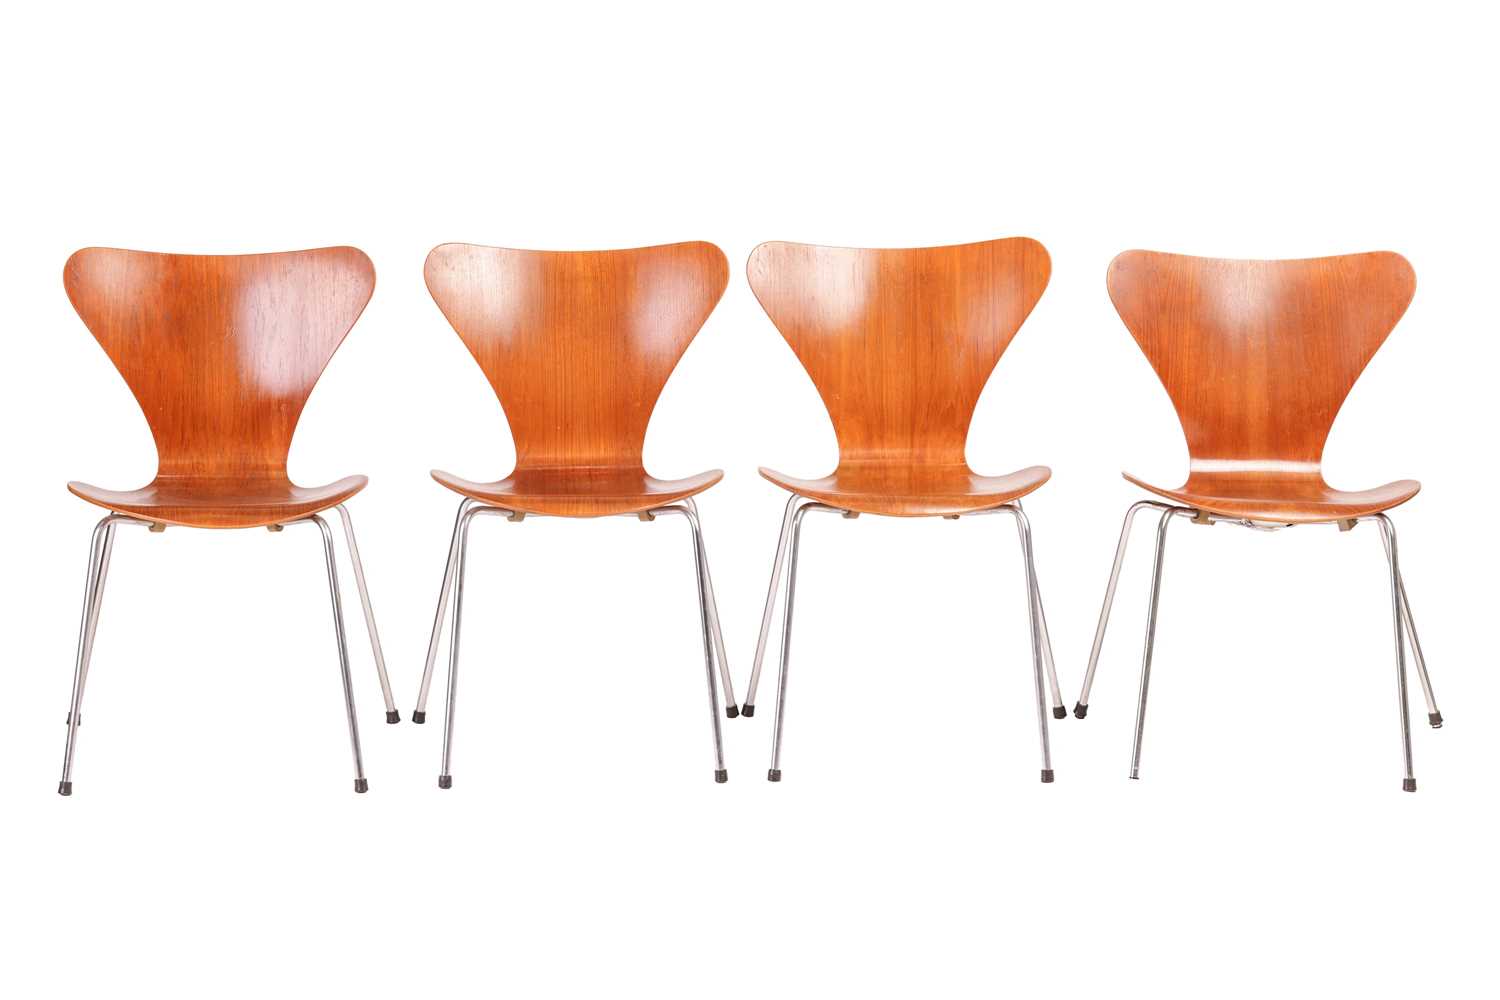 Arne Jacobsen for Fritz Hansen, set of four Sjuan chairs with laminated teak shell and chrome